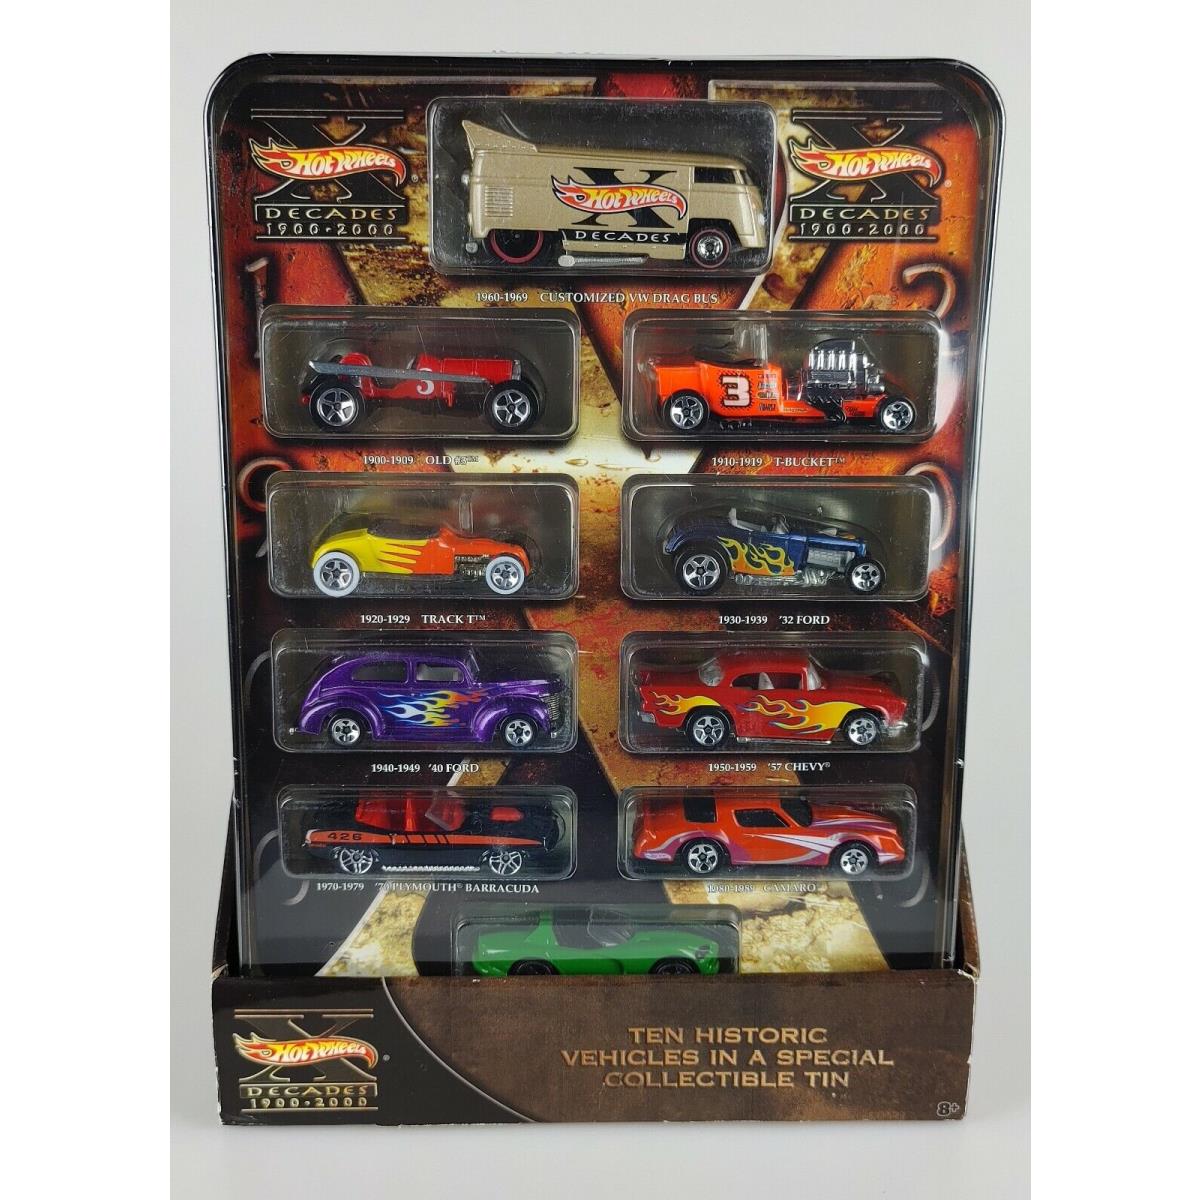 Hot Wheels Decades 1900-2000 Ten Vehicles Cars In Tin with Stand Box Mattel 2002